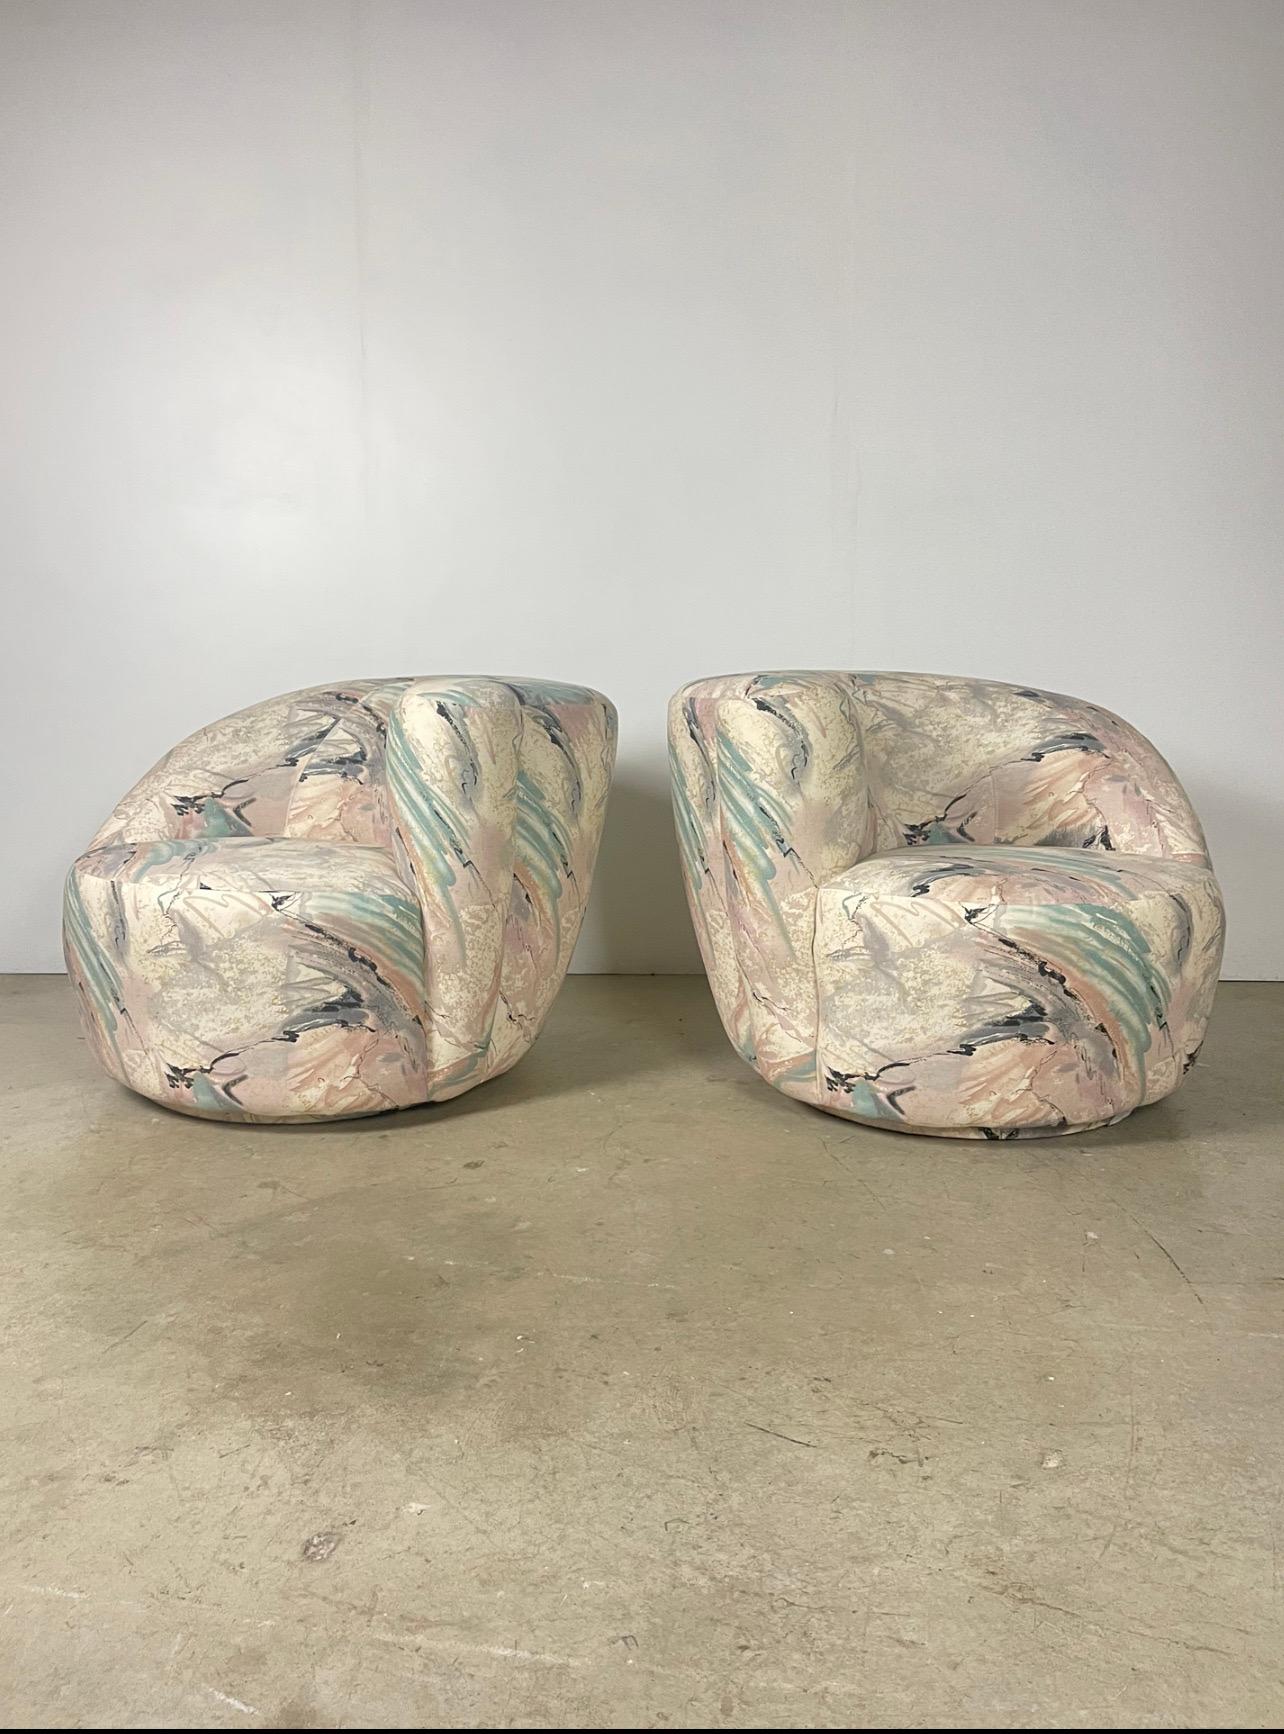 Up for sale is a pair of Nautilus chairs attributed to Vladimir Kagan, one of his most iconic designs. These chairs feature a unique curved shell shape that is both stylish and comfortable, with a plush padded seat and backrest. The chairs are